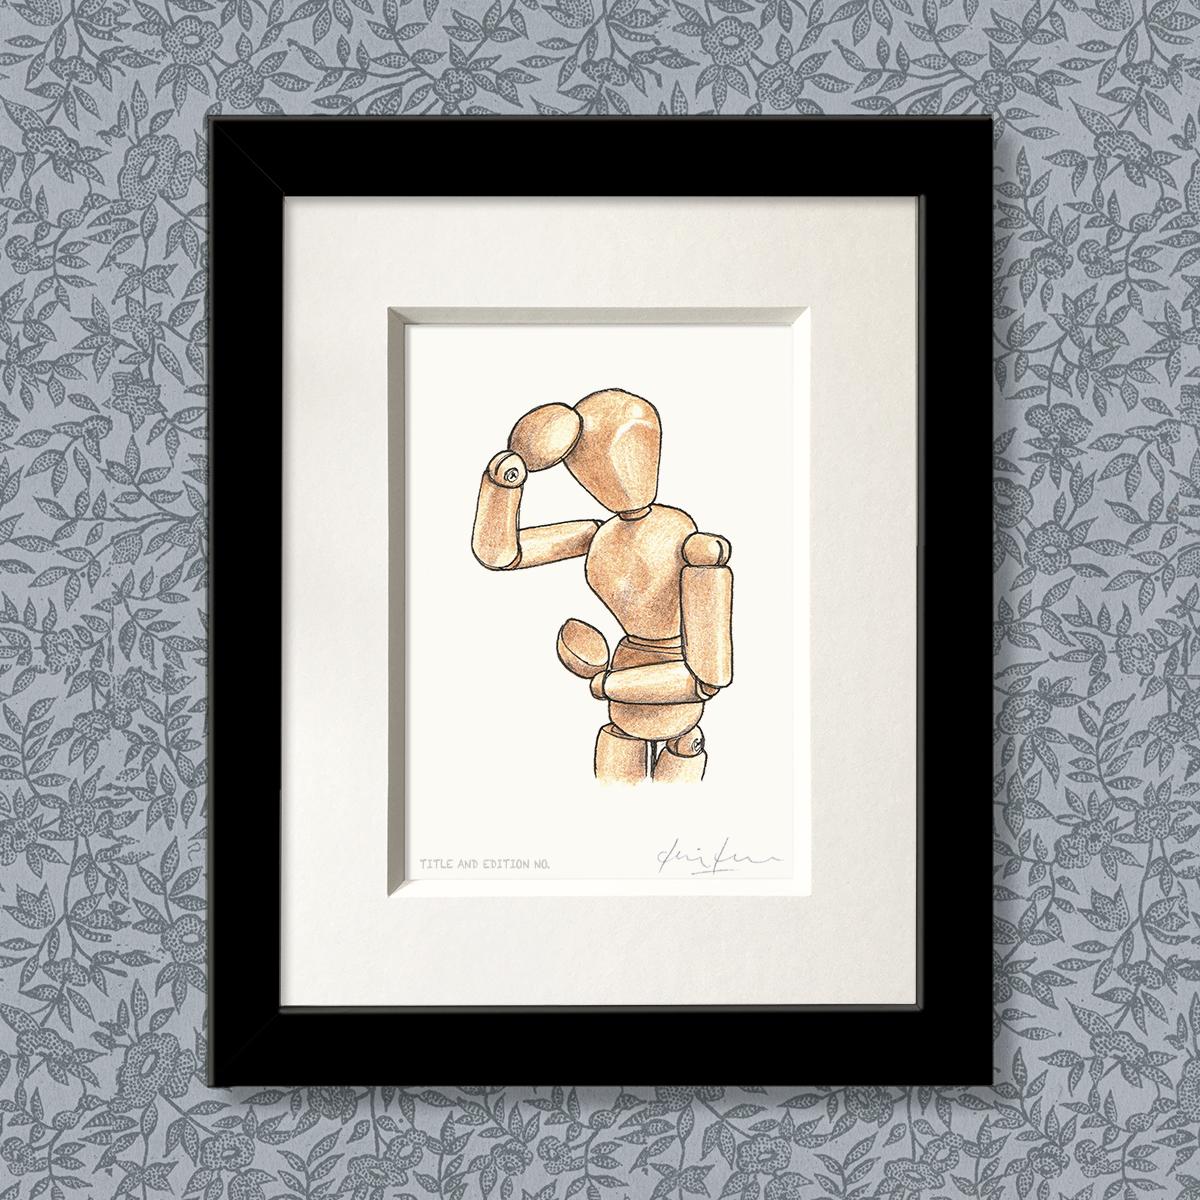 Limited edition print from pen and ink drawing of an artists' mannequin in a black frame